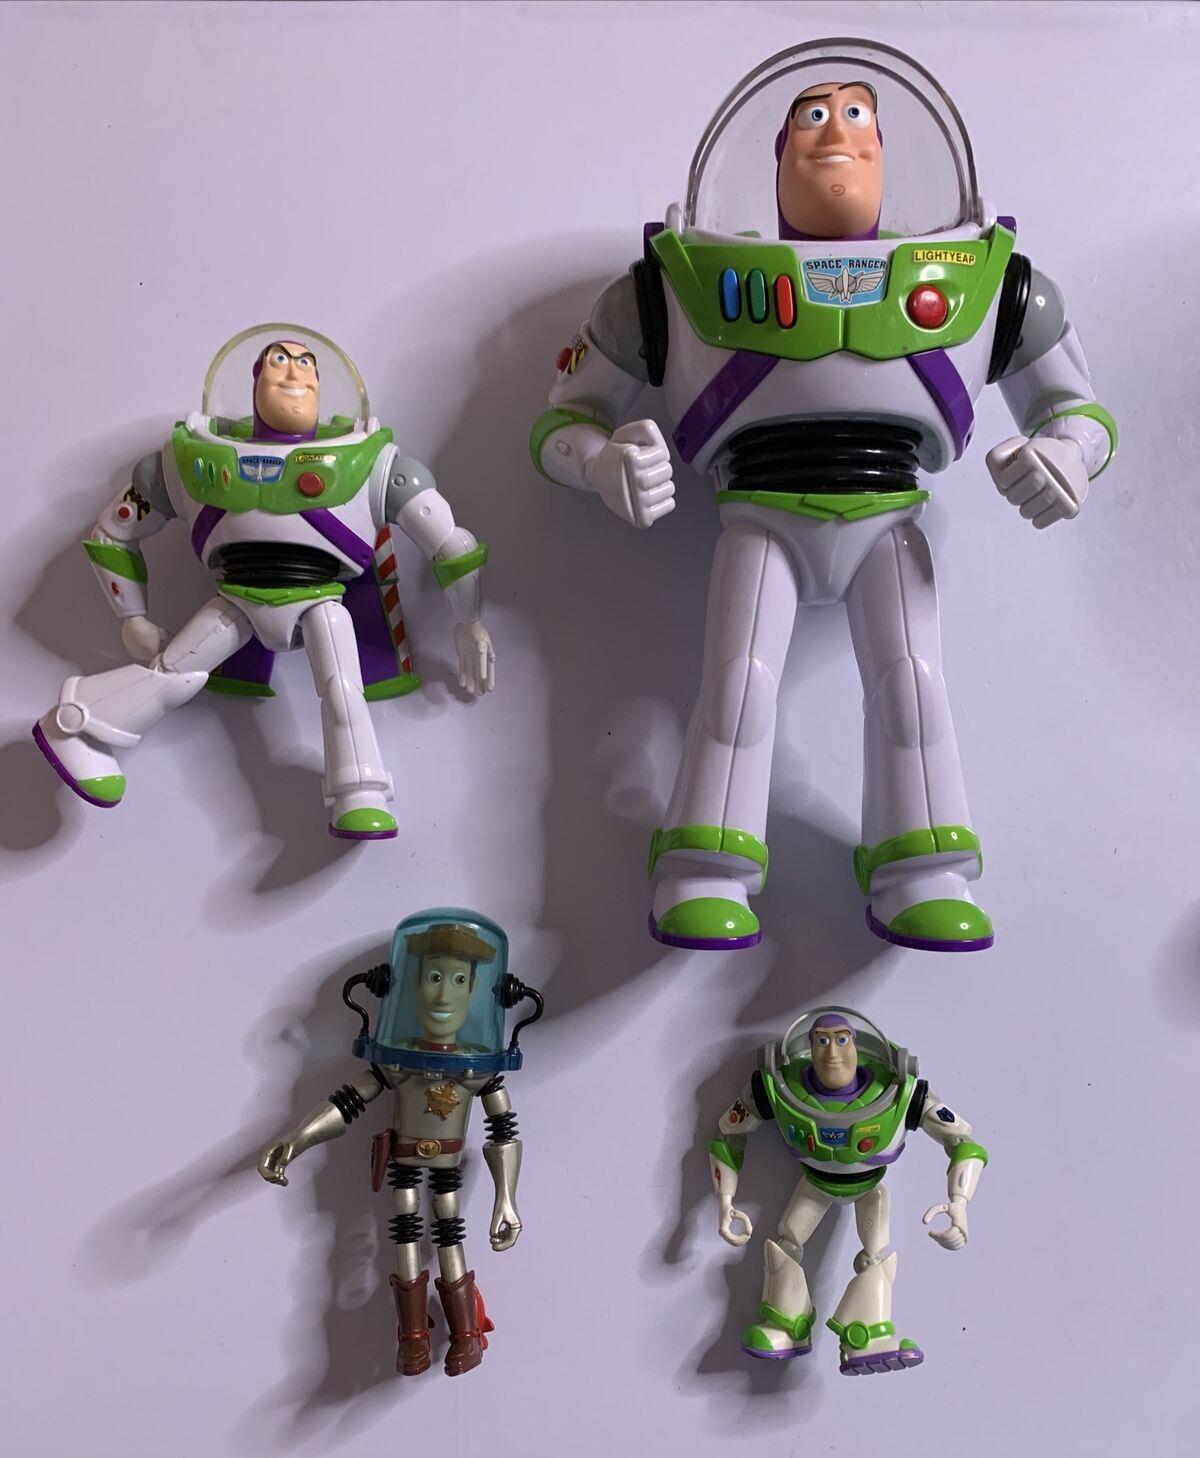 4x Toy Story Action Figure Woody Buzz Lightyear, Space Woody